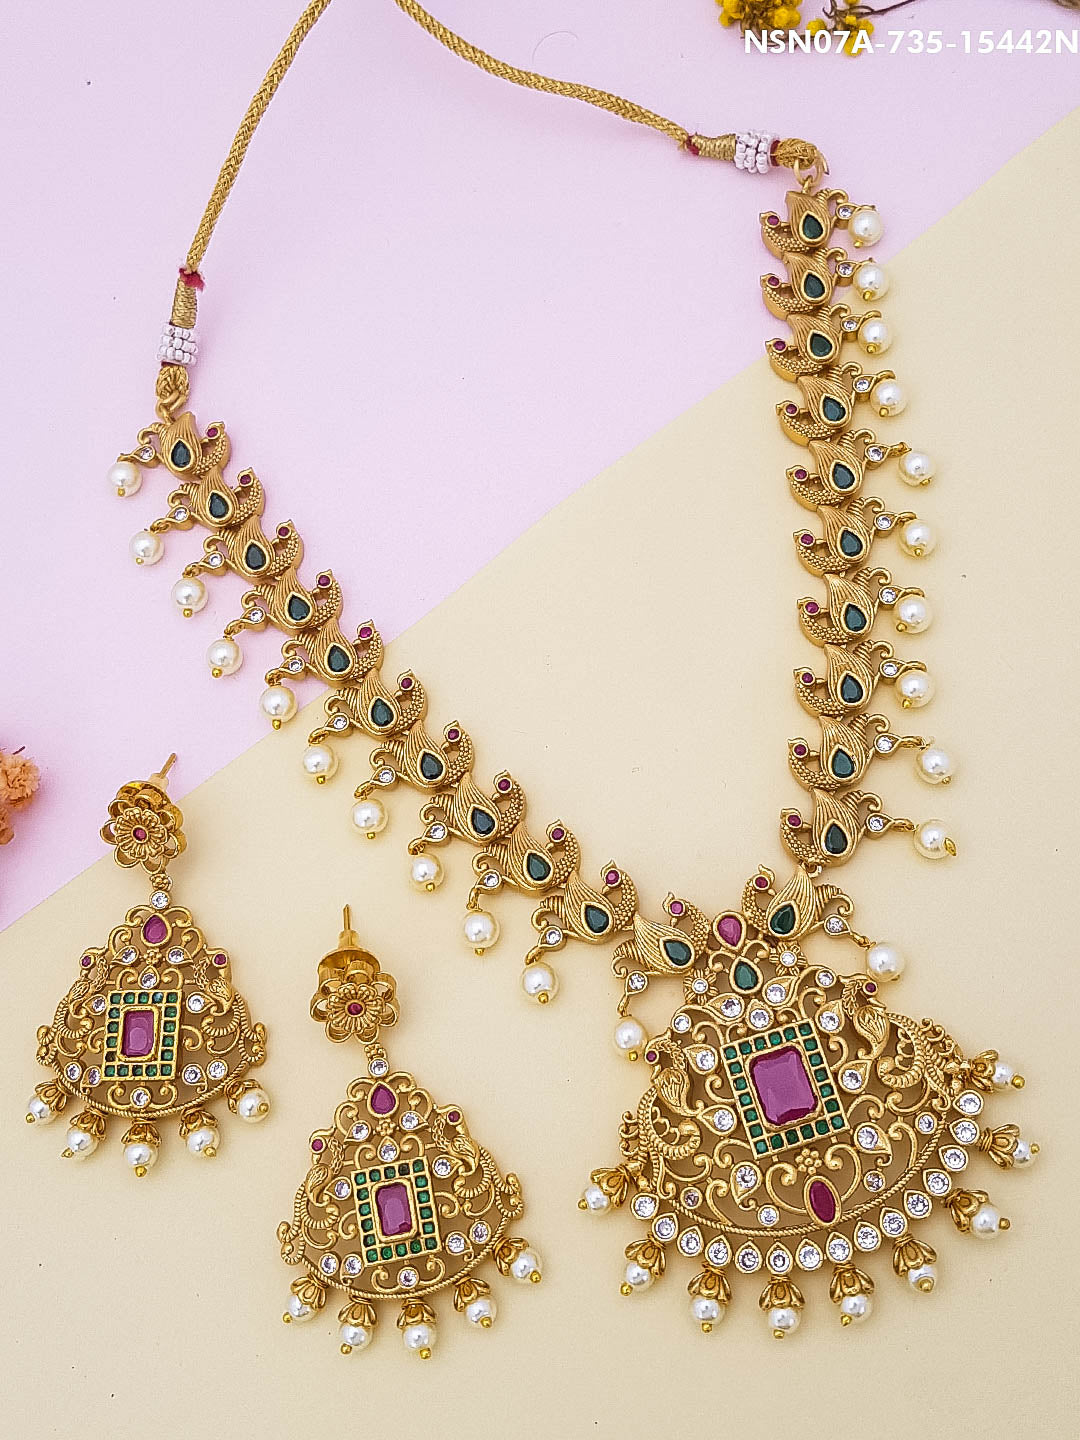 Gold Plated Zercon Short Necklace Set 15442N